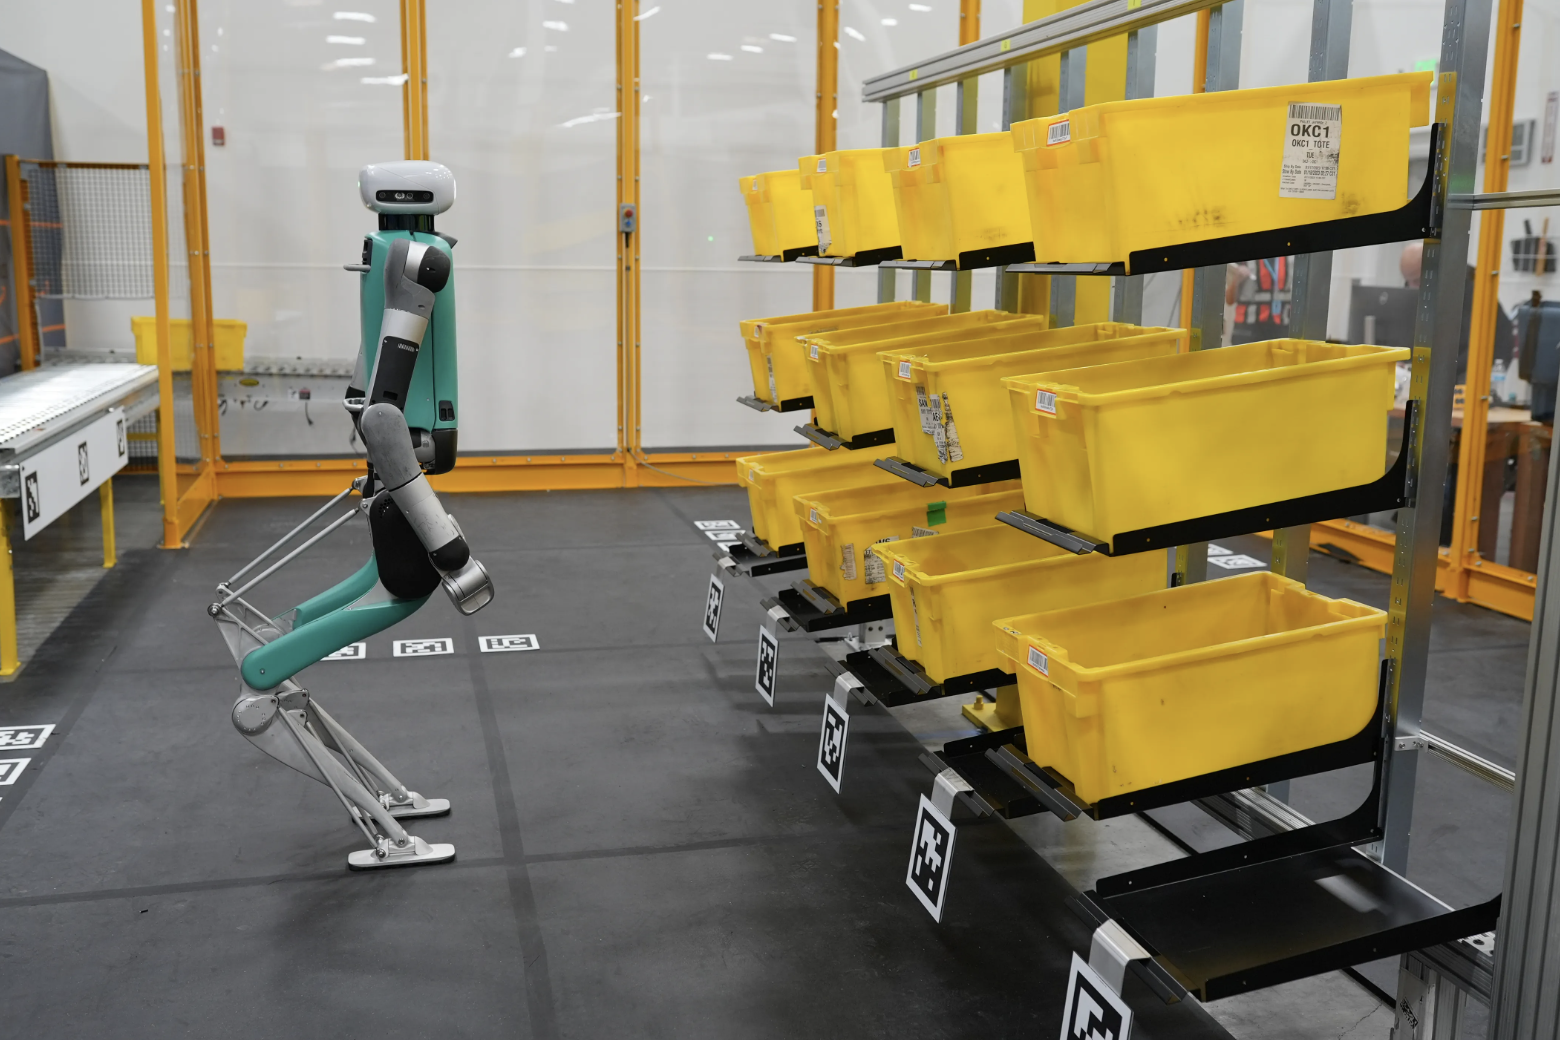 A Digit robot at a lab near Seattle where Amazon is testing them. Image courtesy of Agility Robotics.